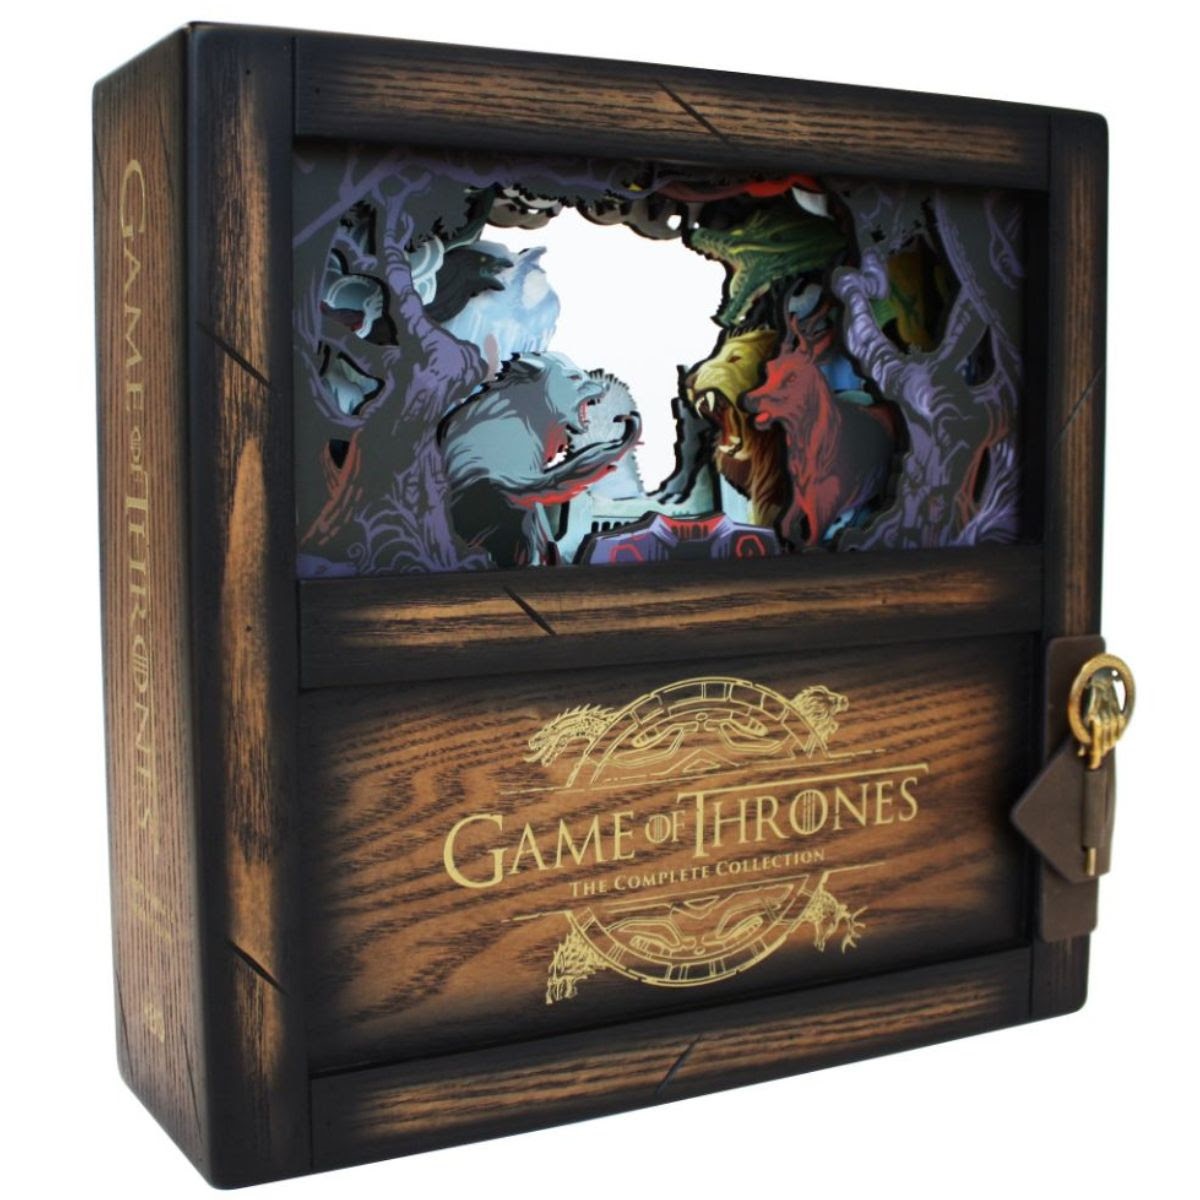 Game of Thrones Limited Edition Collector's Set